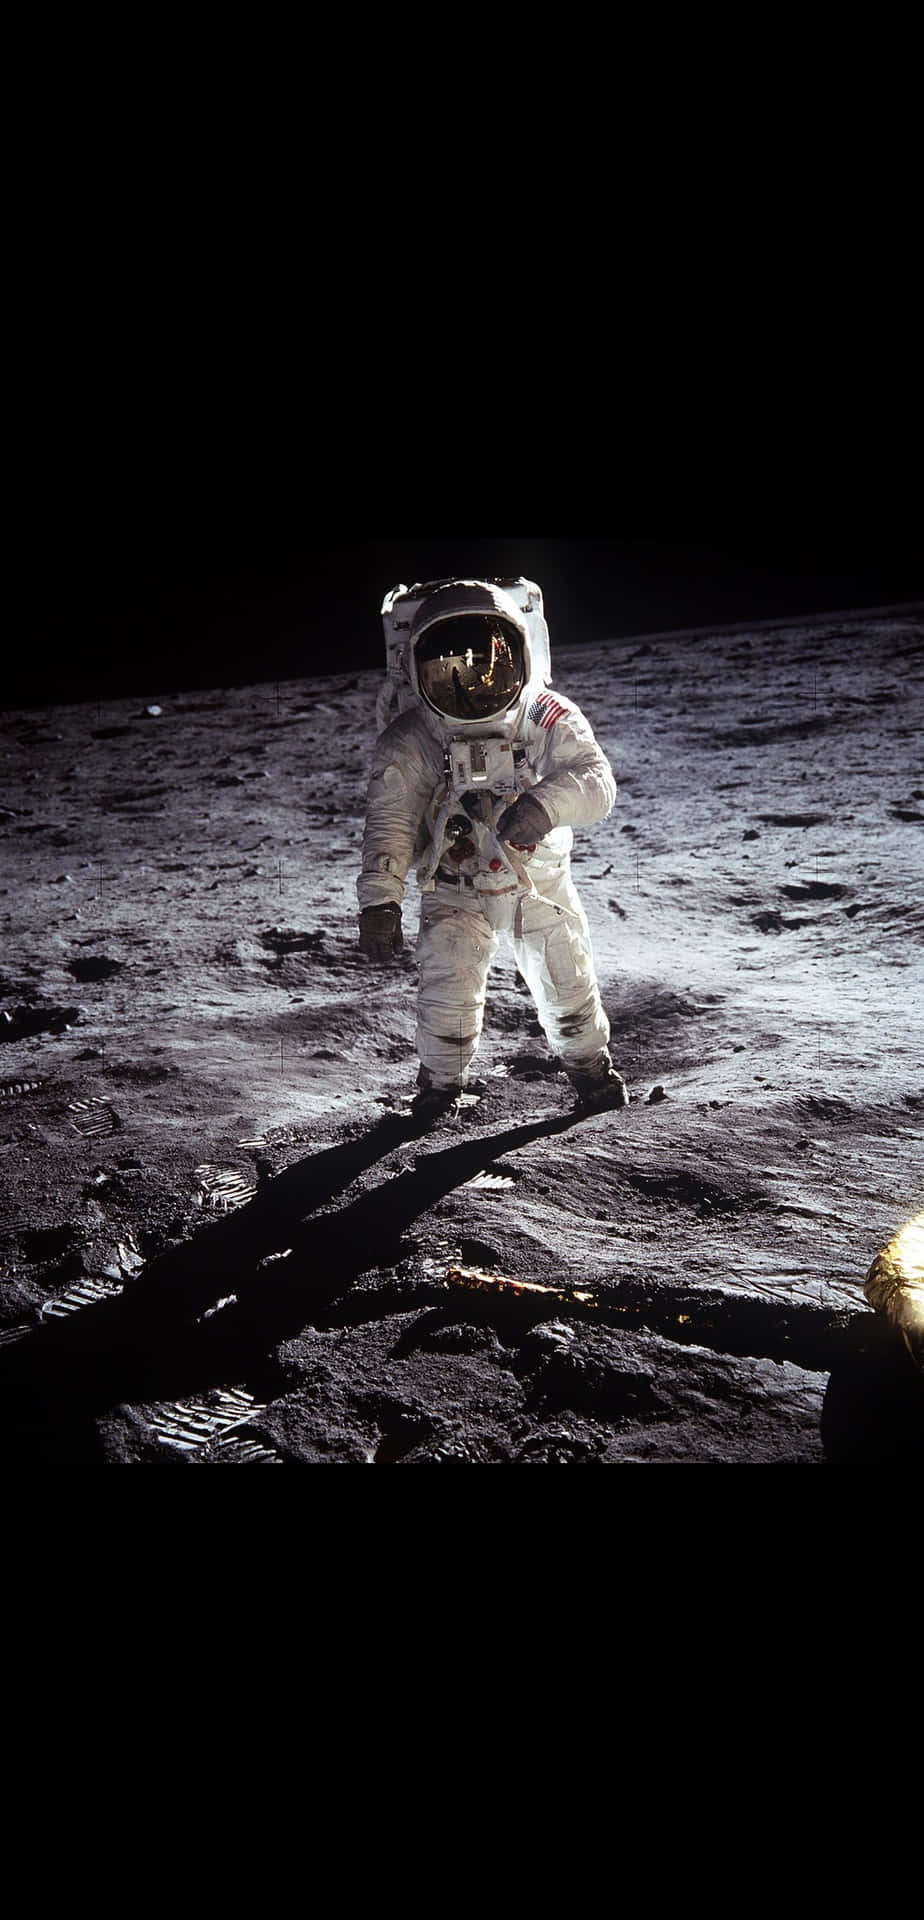 Neil Armstrong Takes His Historic First Step On The Moon Wallpaper